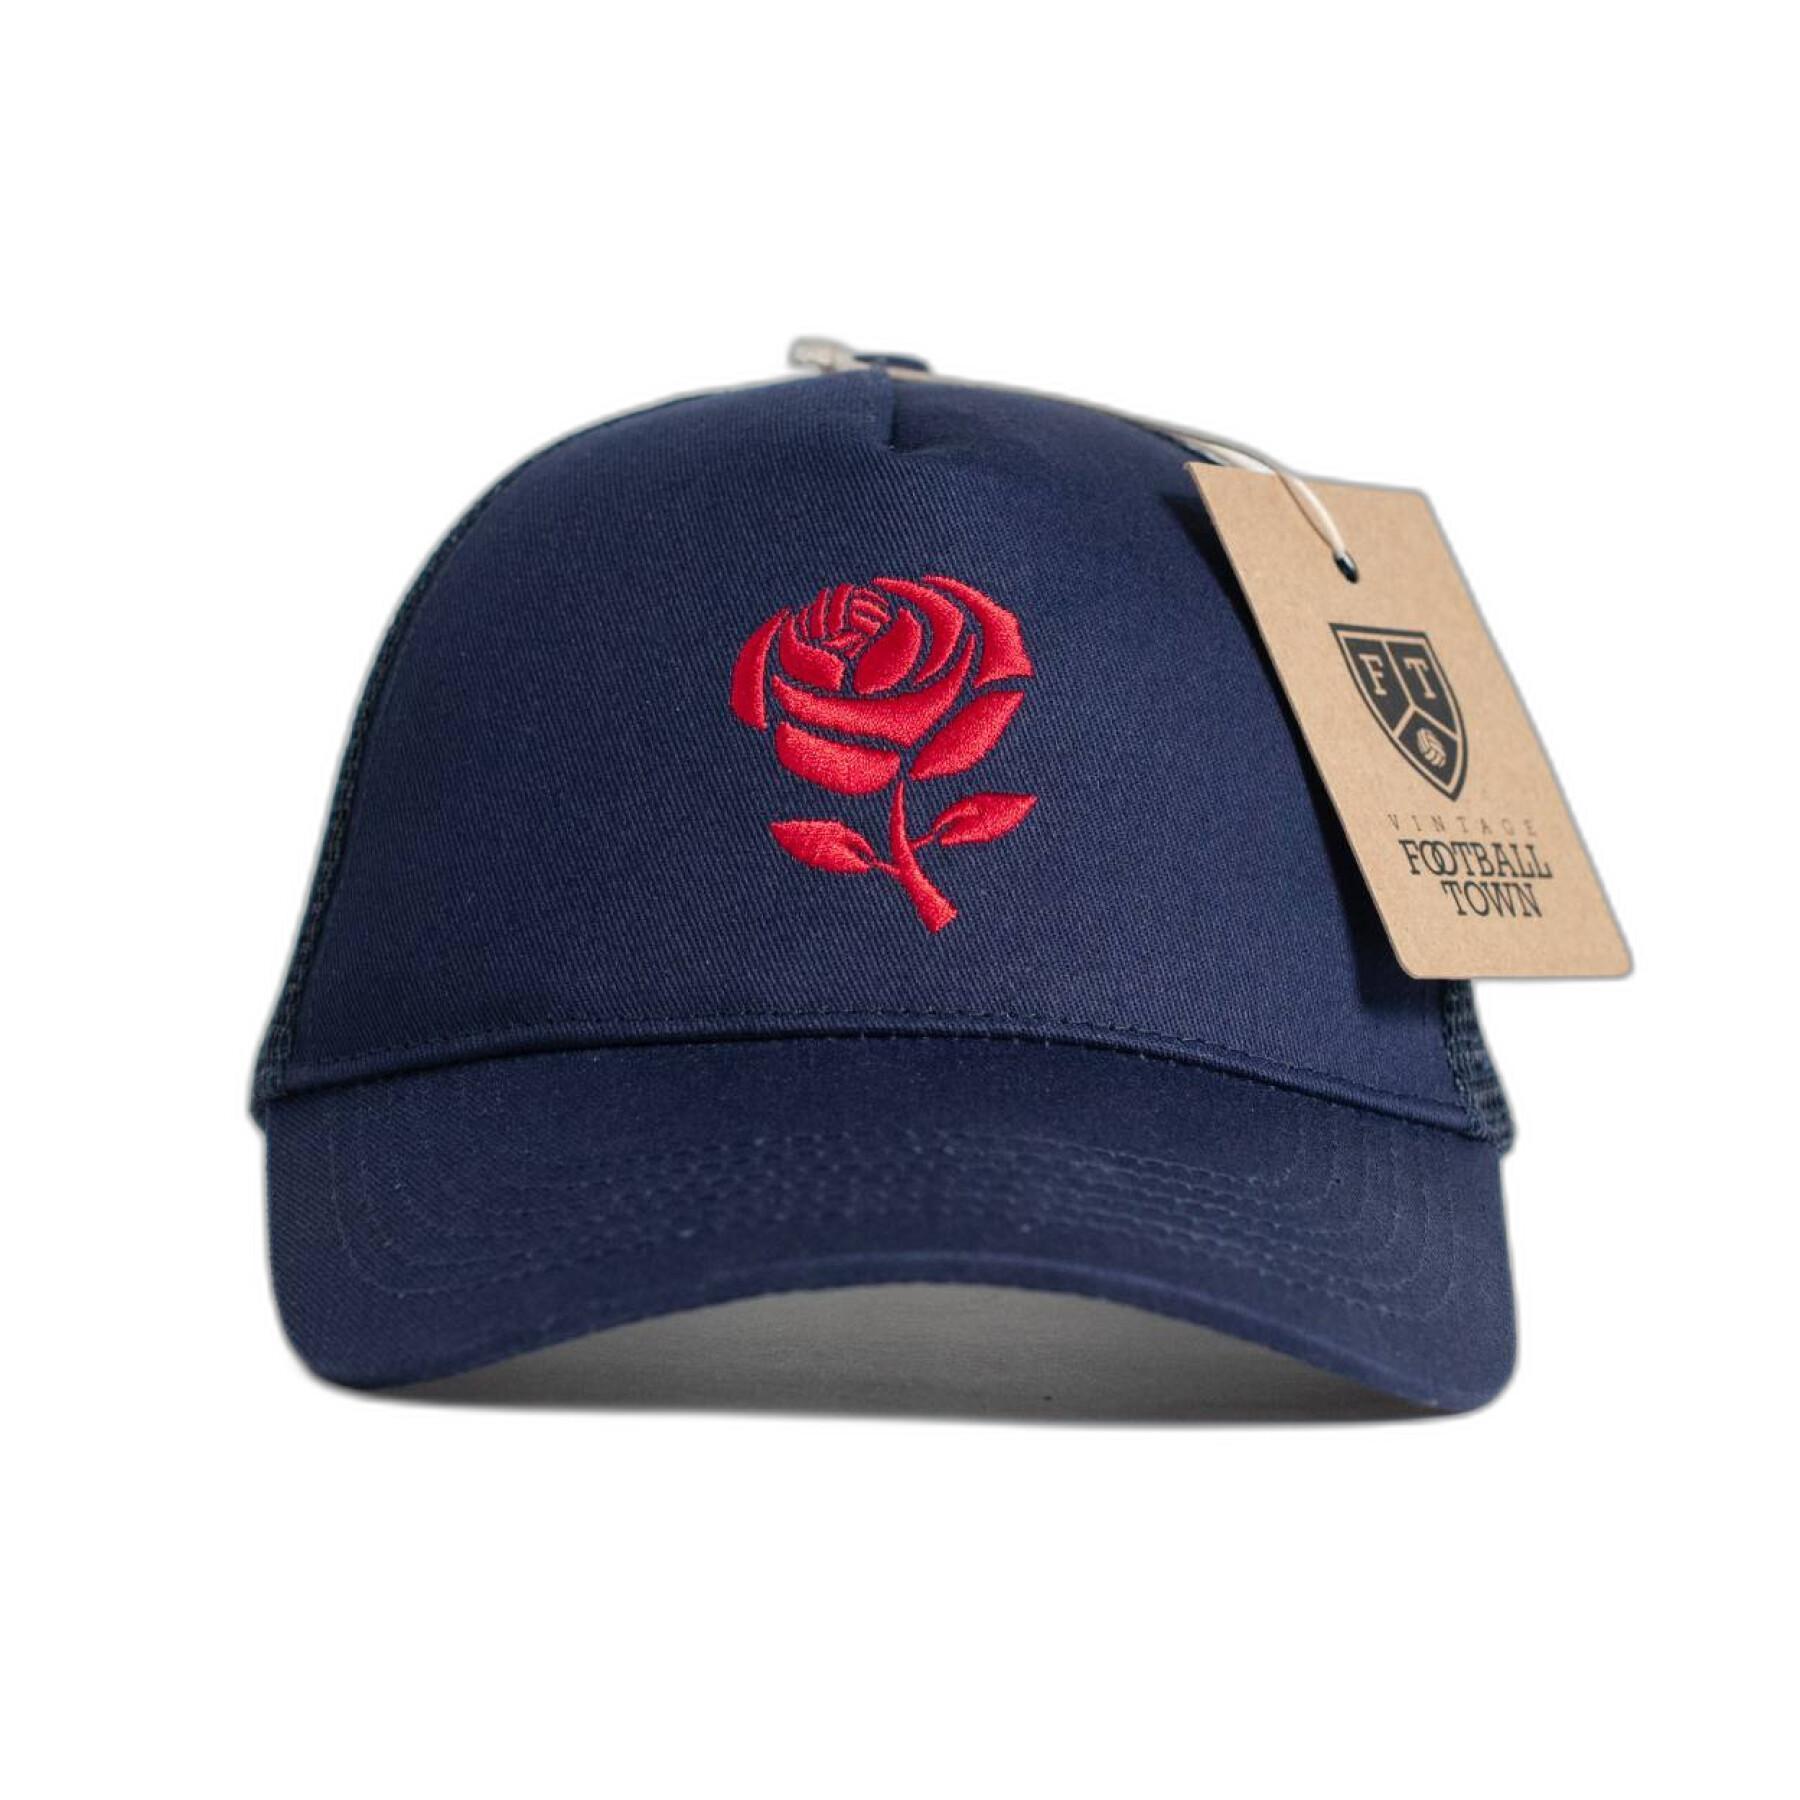 Casquette Trucker Football Town The Red Rose